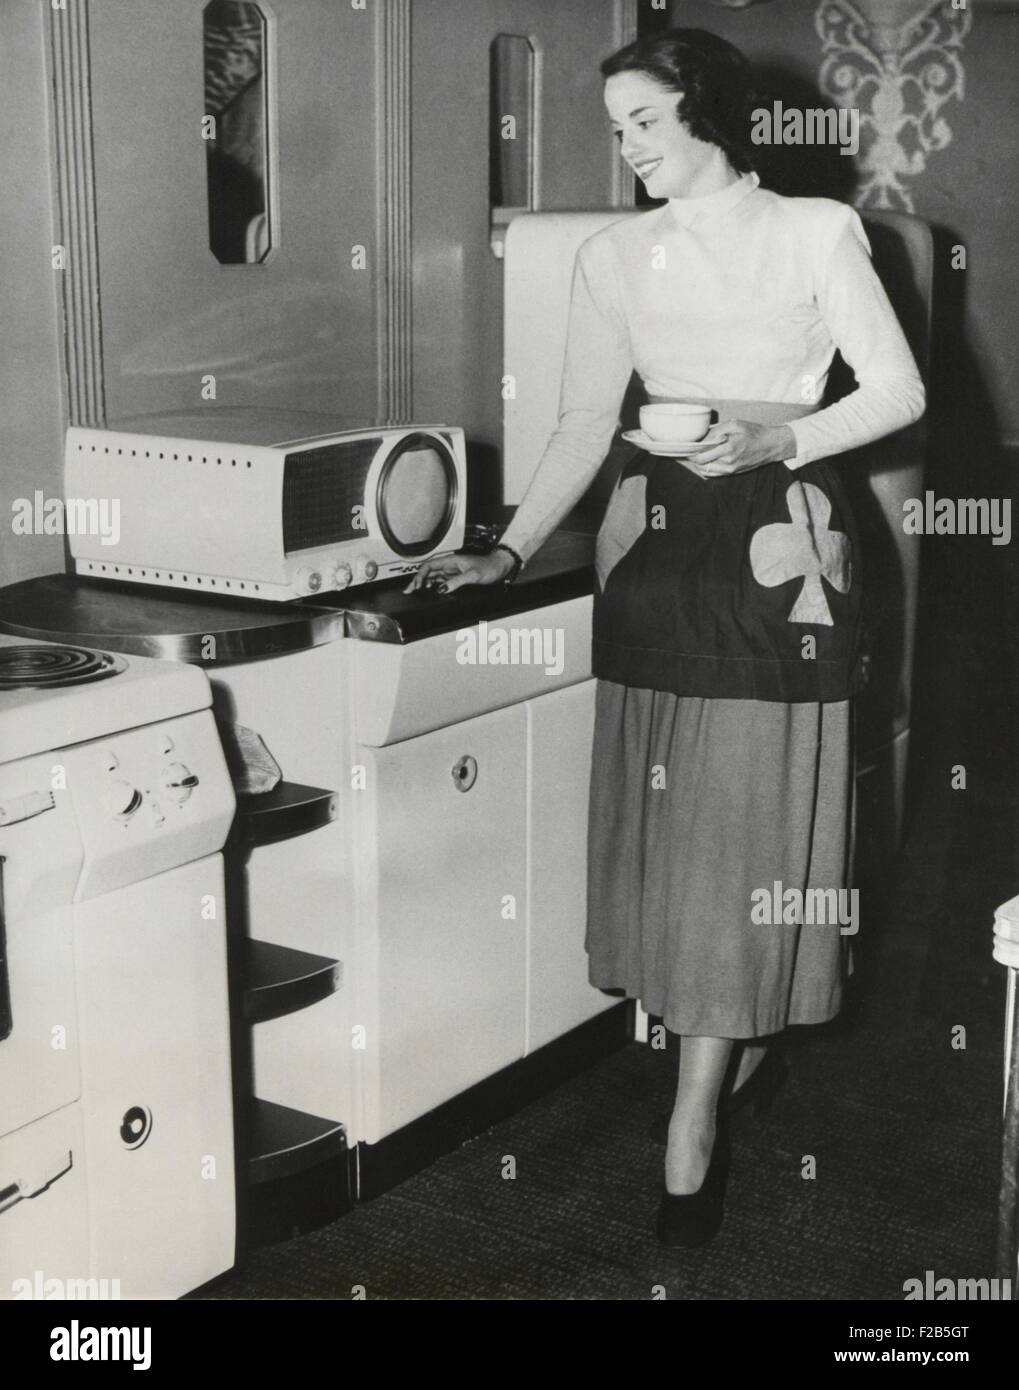 A television in the kitchen for the first broadcast of a cooking show in New York. Sept. 1949. - (BSLOC 2014 17 135) Stock Photo